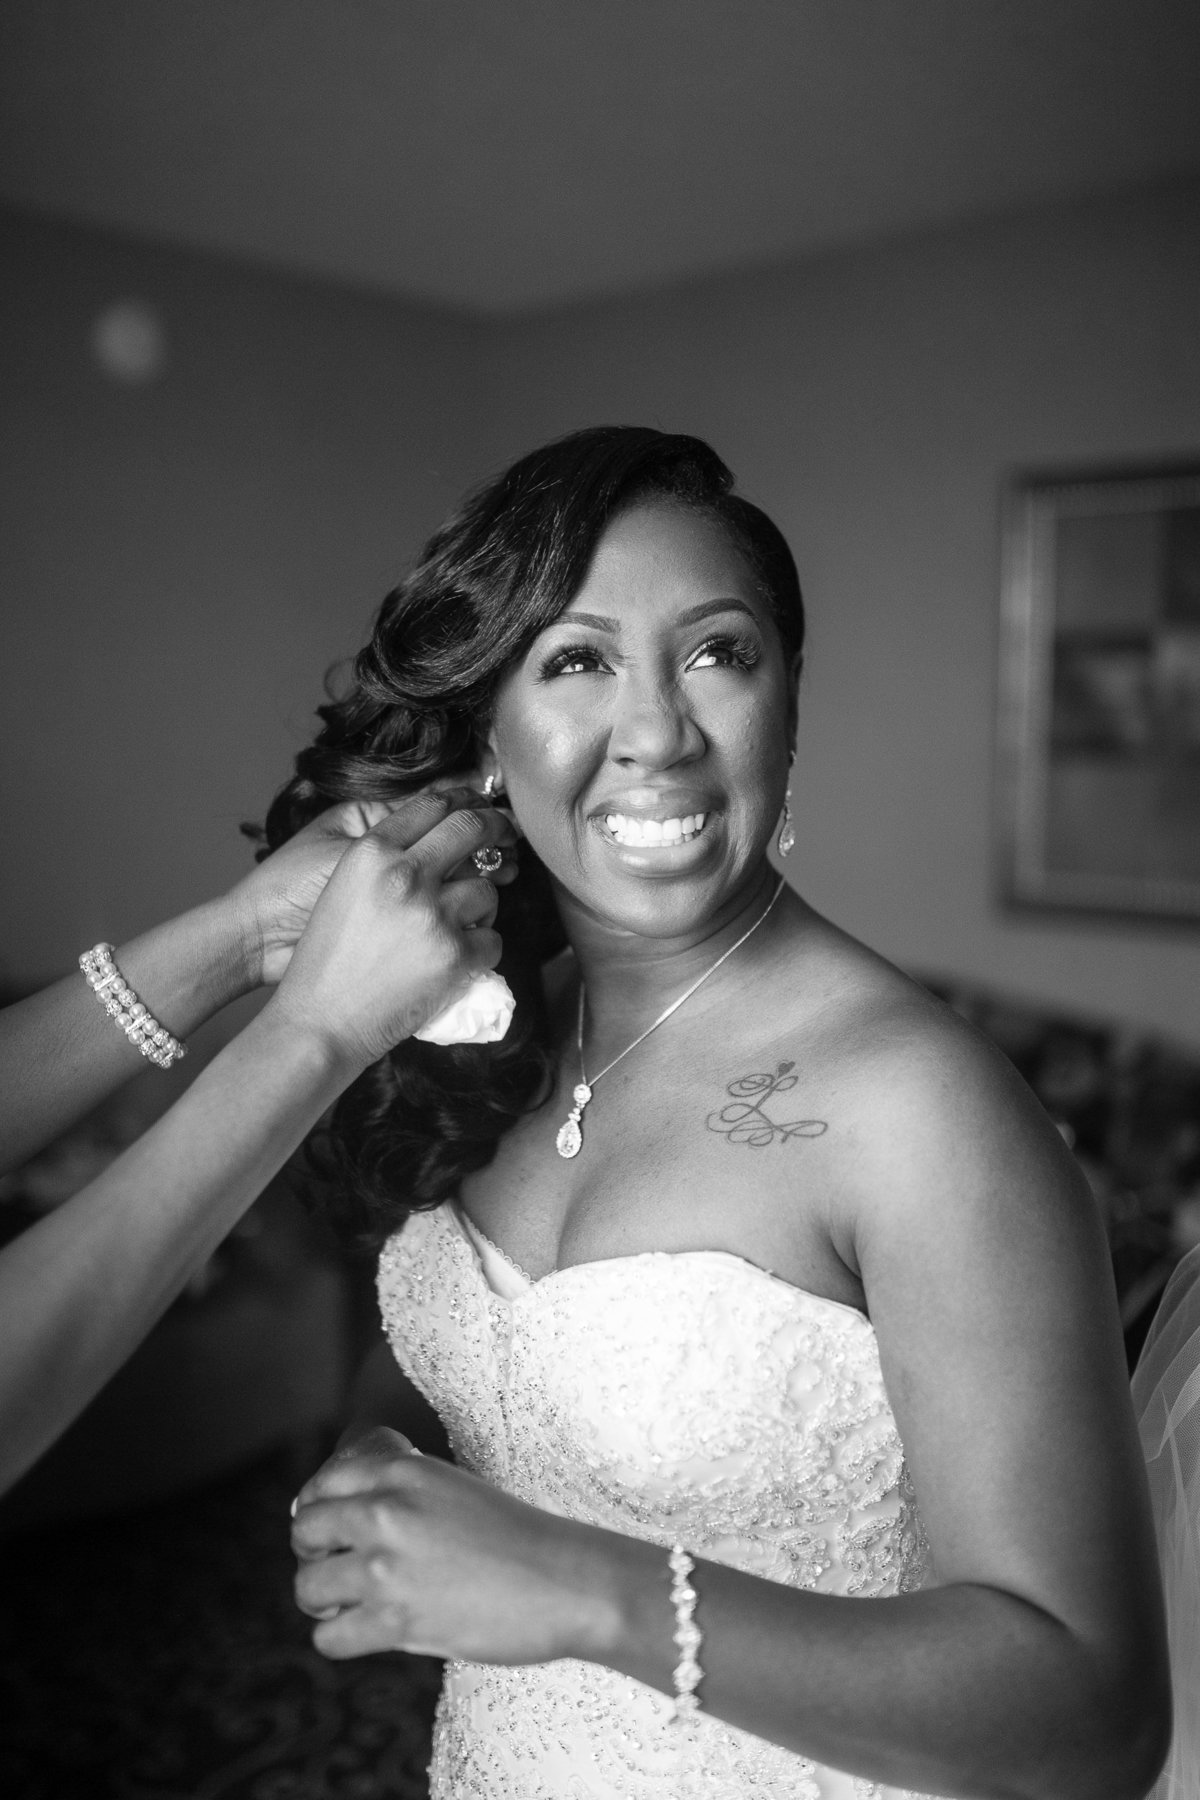 Bride is all smiles as her bridesmaid helps her put on her earrings.